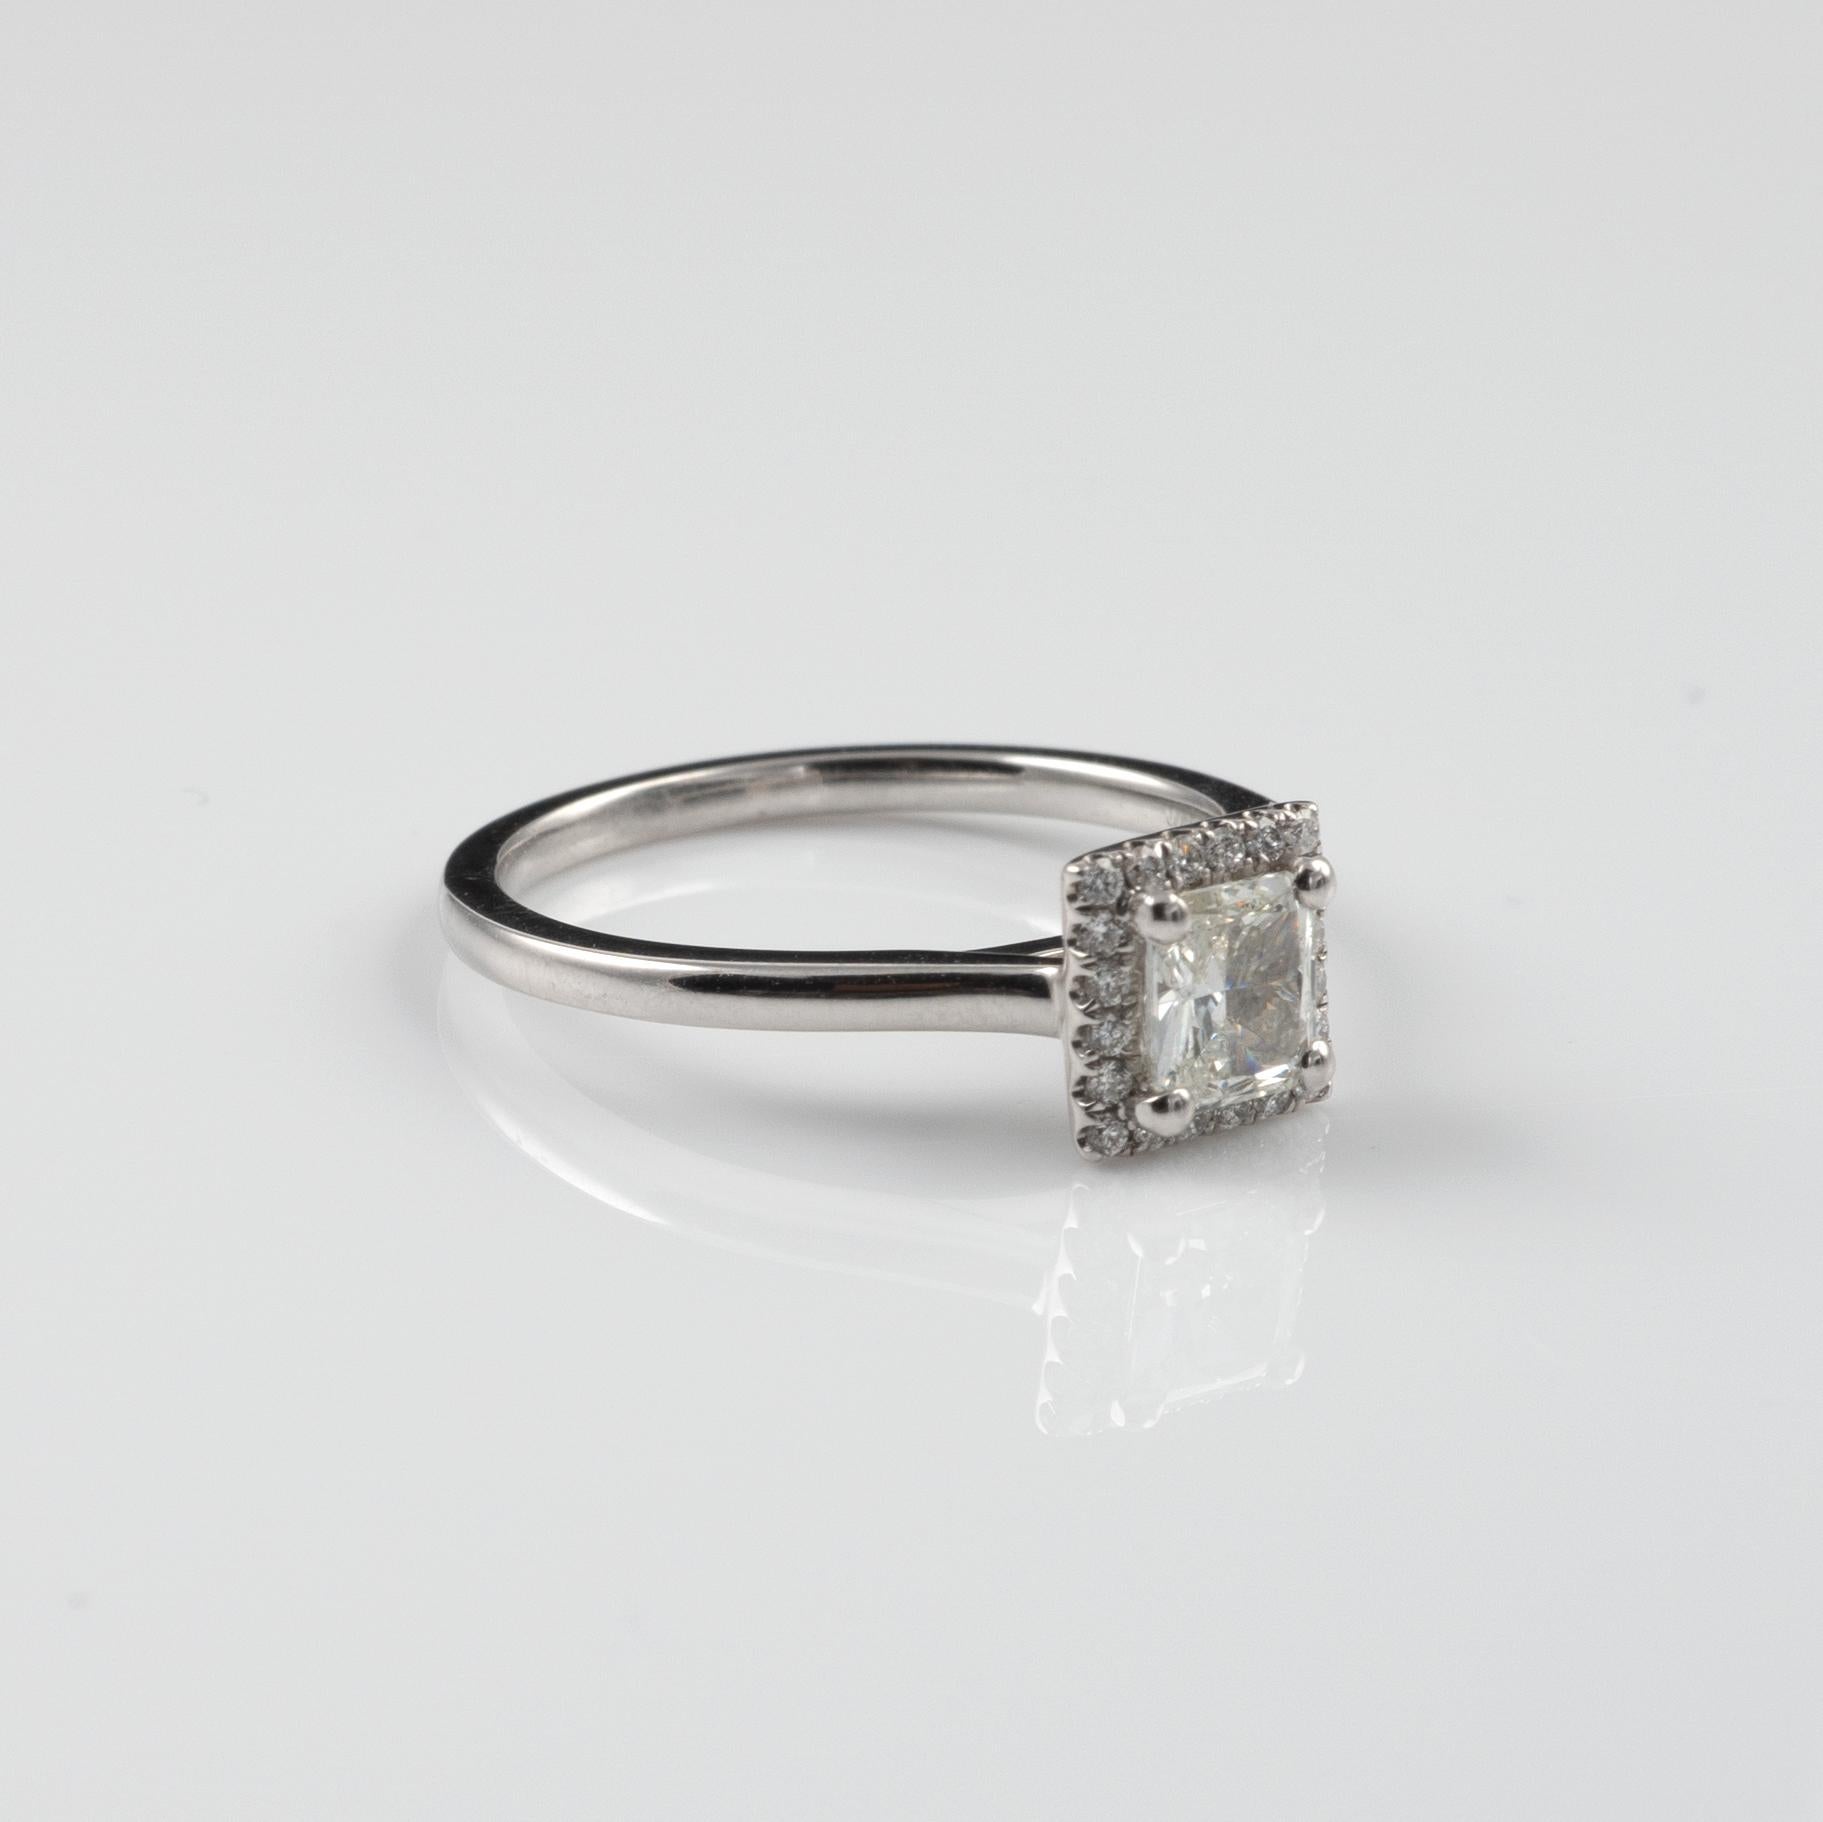 Certified Radiant Cut 0.65 Carat Diamond Halo Ring 18 Karat White Gold   In Excellent Condition For Sale In Preston, Lancashire